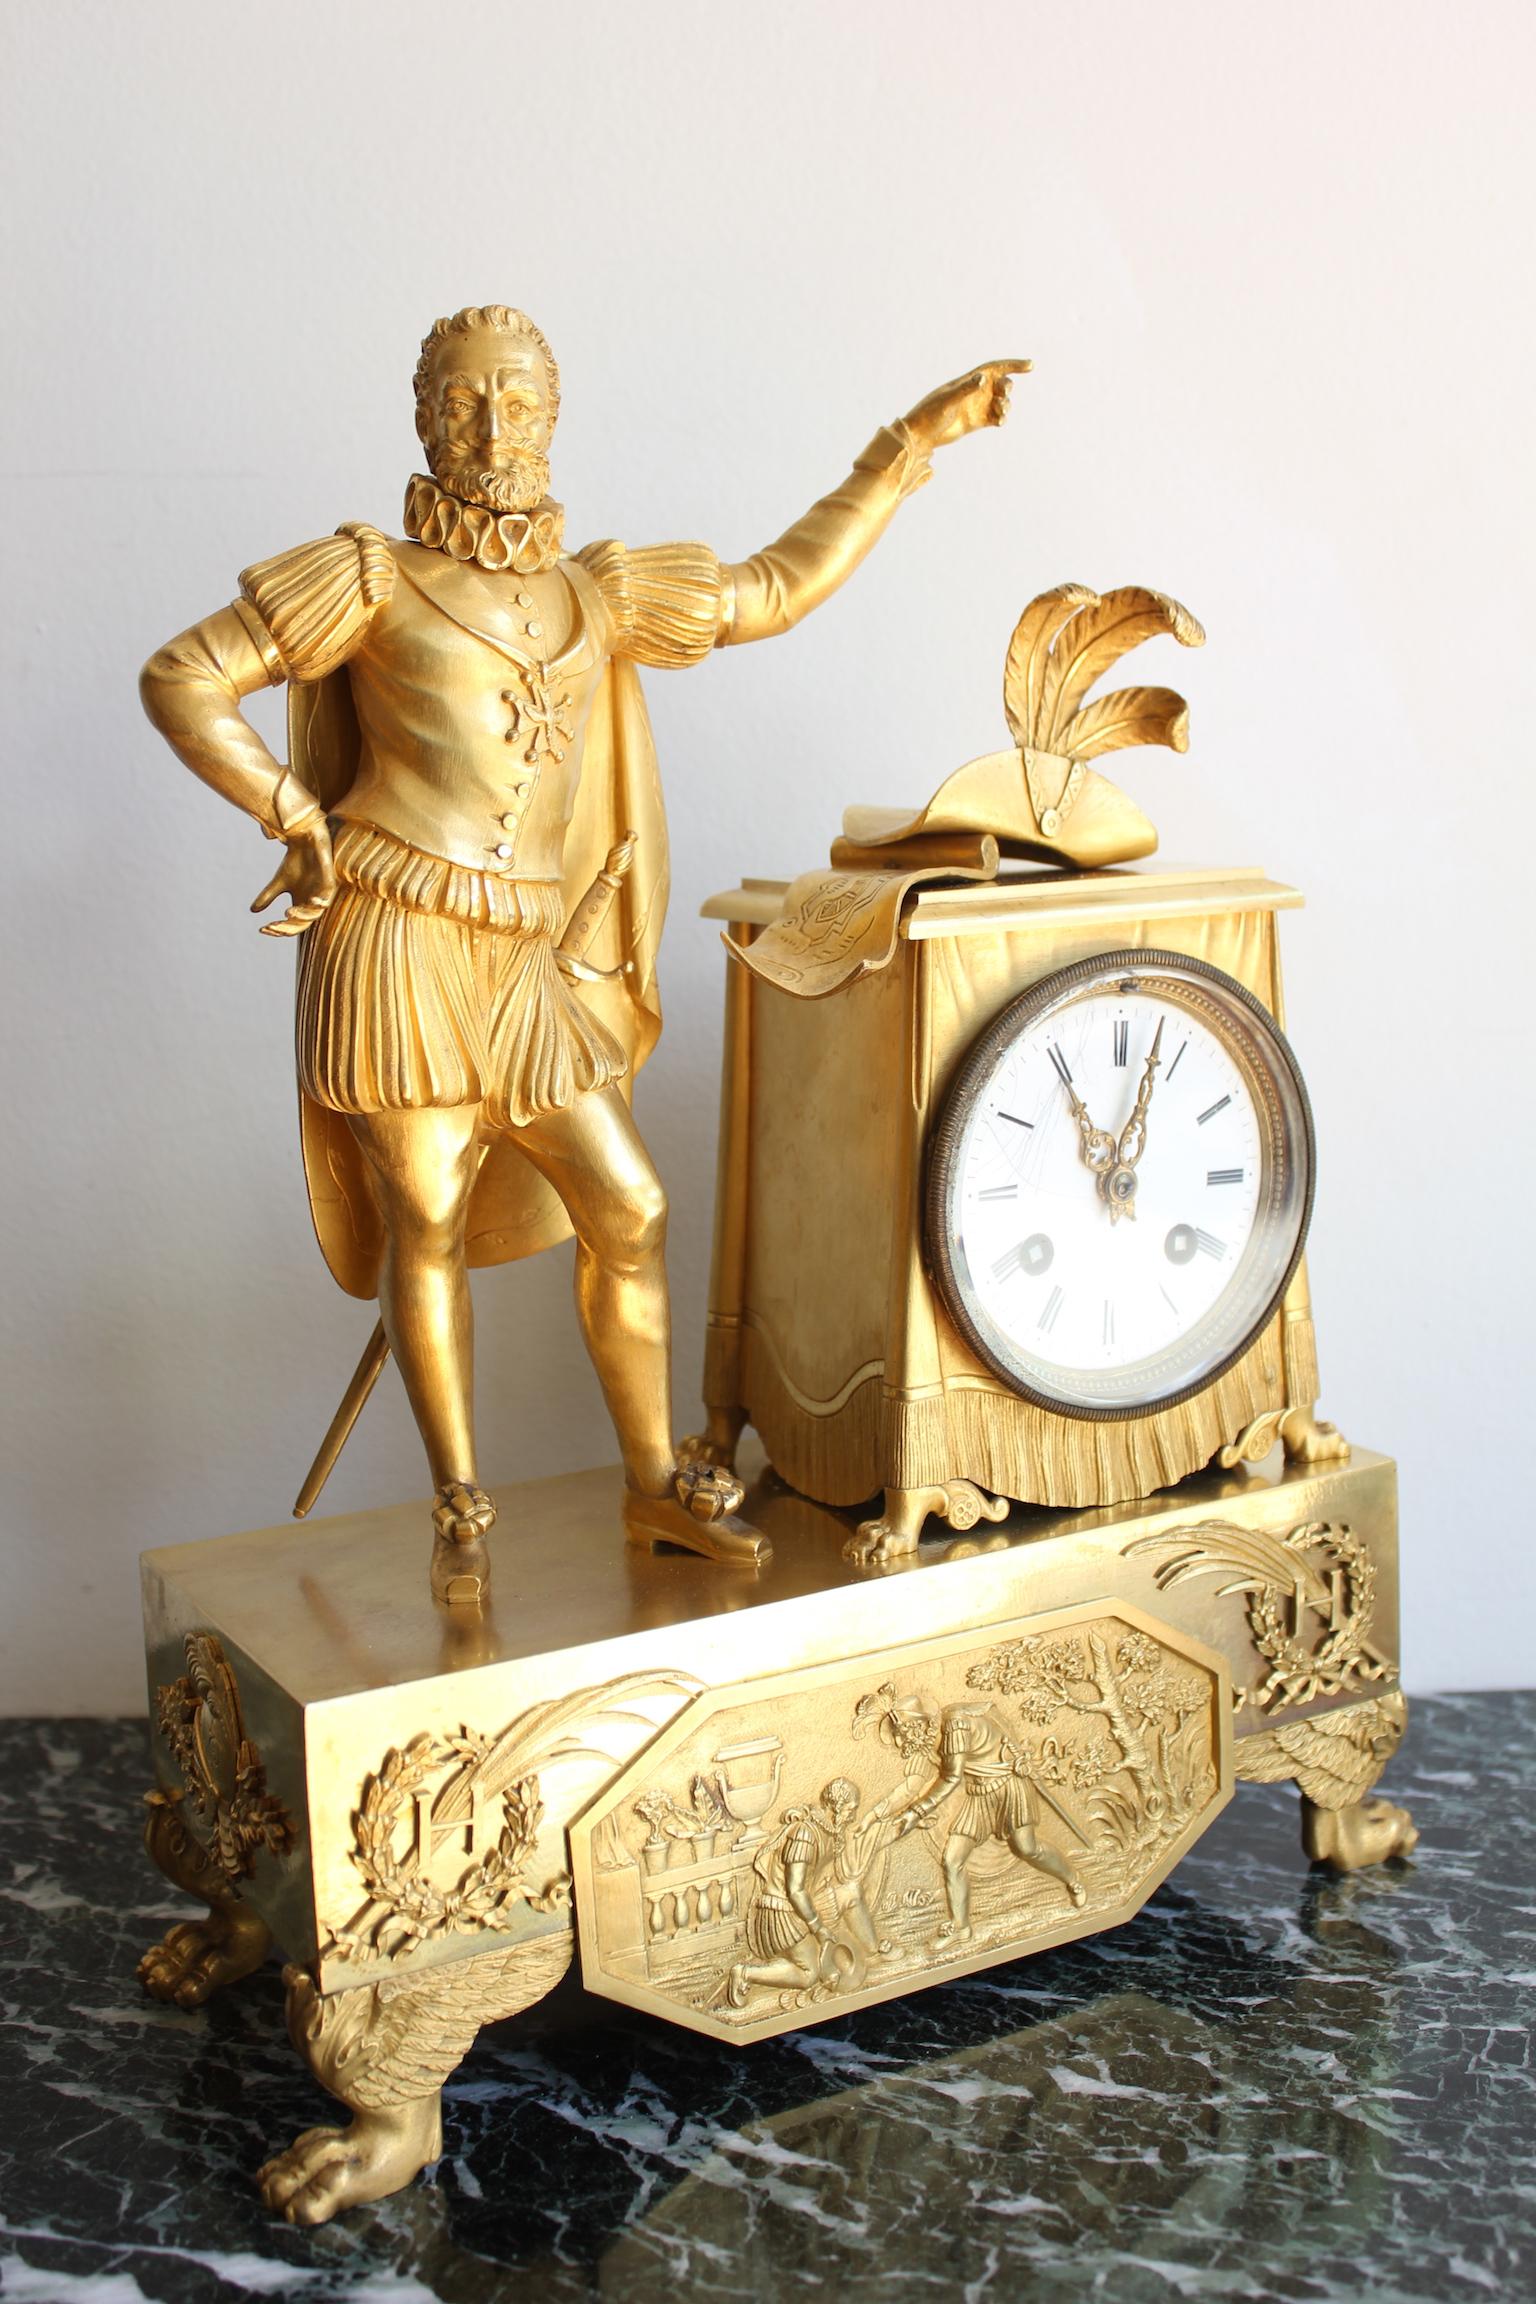 French Restauration clock in gilded bronze decorated with Henry IV.
Good condition.
Dimensions: width 27cm, height 34.5cm, depth 11cm.